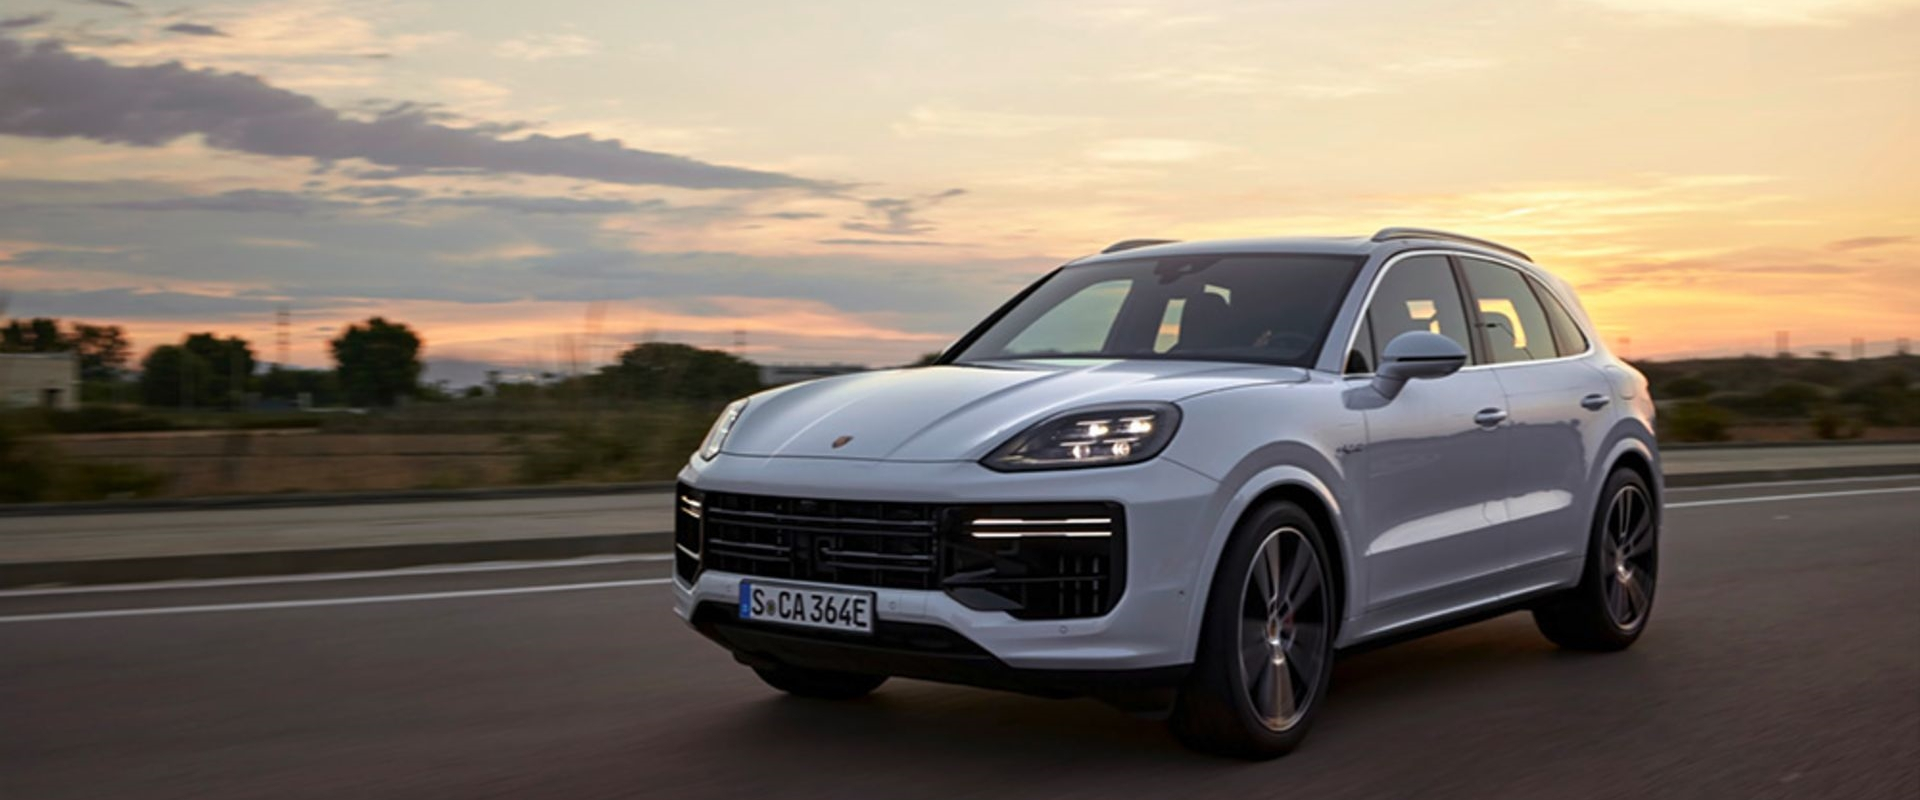 Porsche Cayenne Turbo E-Hybrid Pulls Up with 729 HP, 700 lb-ft of Torque 5